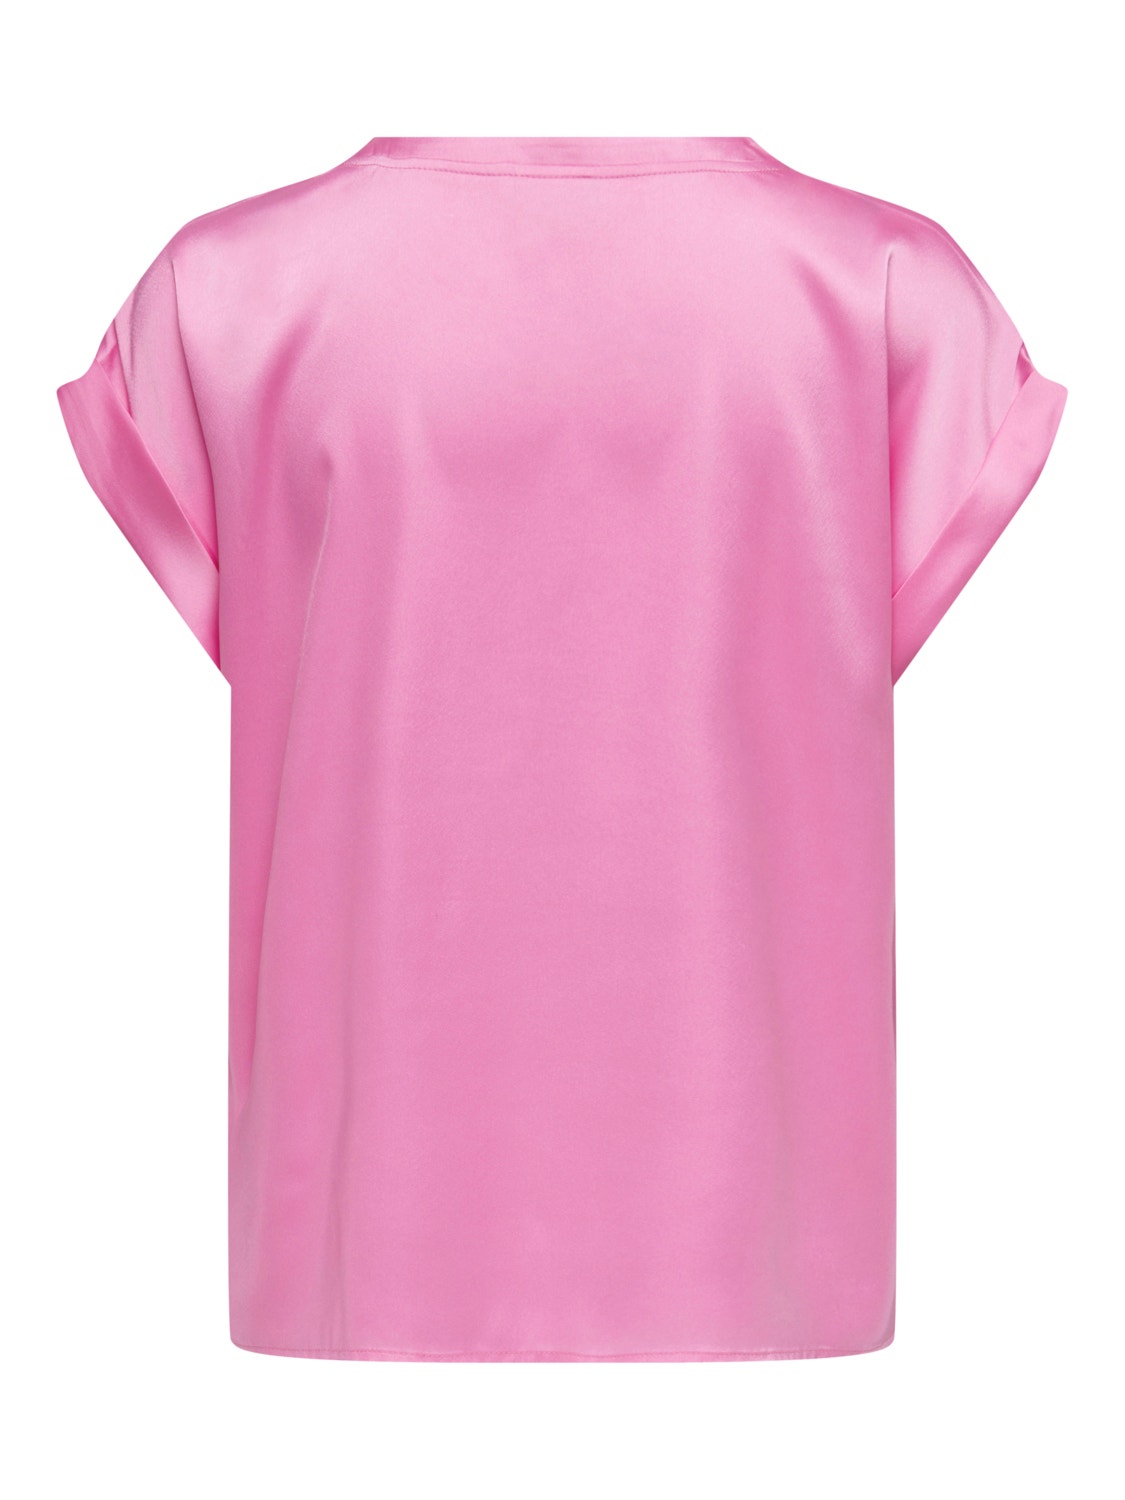 ONLY o-neck top -Fuchsia Pink - 15304077